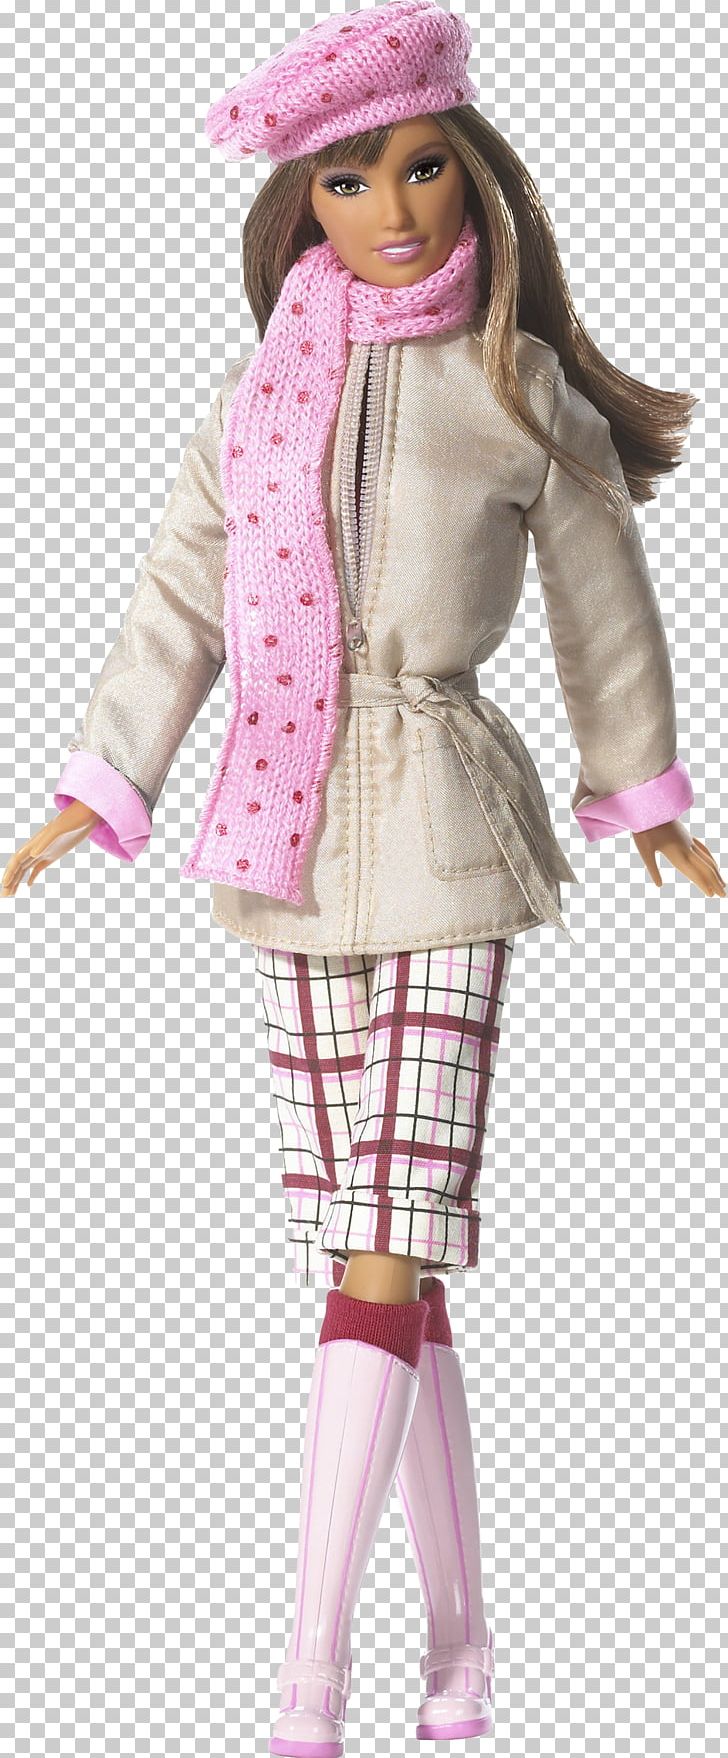 Barbie Doll Benetton Group Fashion Scarf PNG, Clipart, Art, Barbie, Barbie Doll, Benetton Group, Clothing Free PNG Download